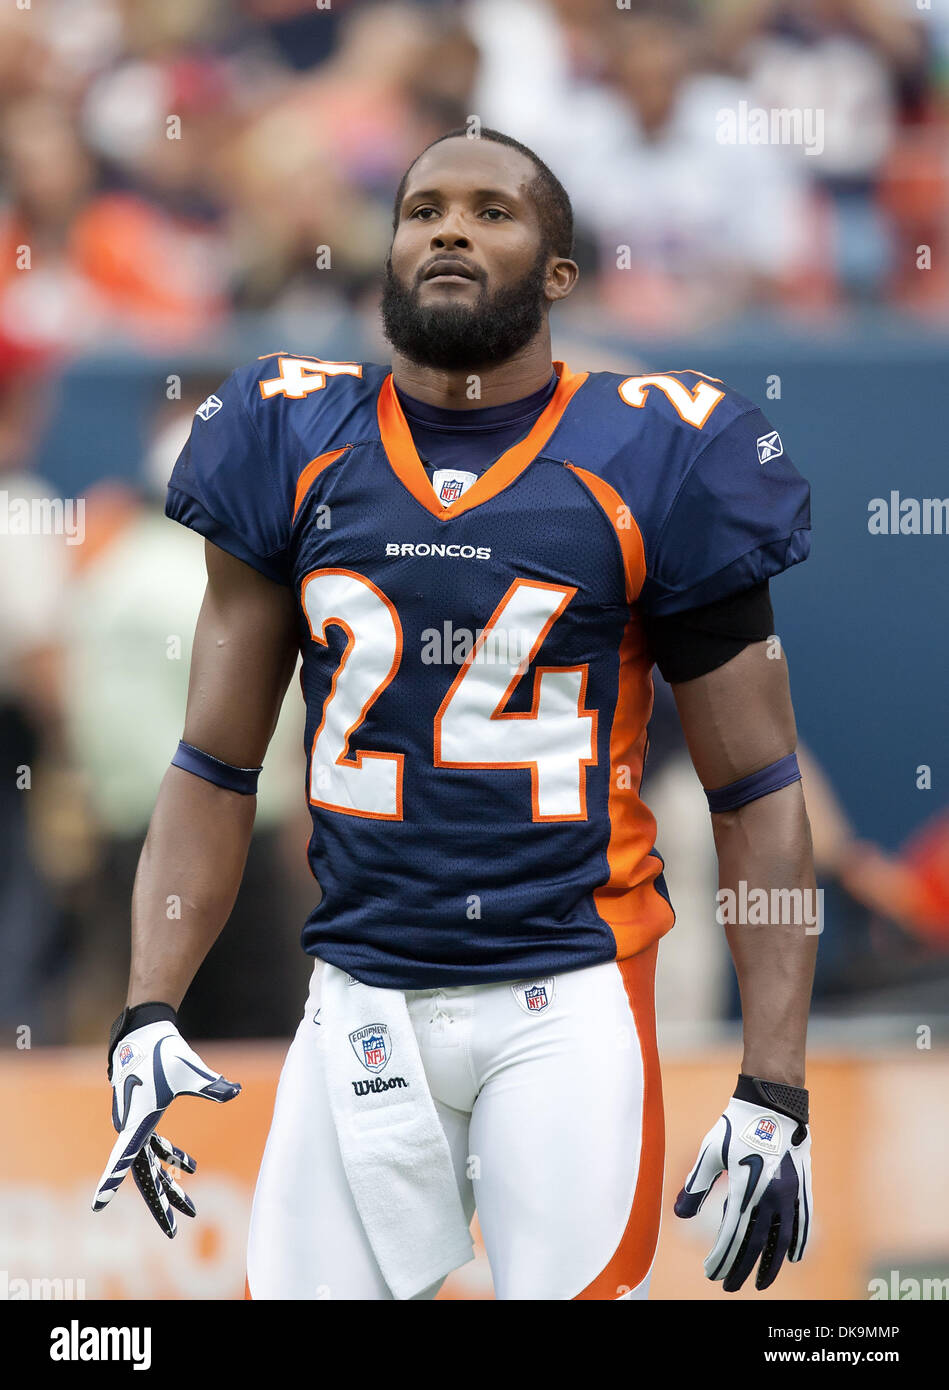 Aug. 27, 2011 - Denver, Colorado, U.S. - Broncos CB CHAMP BAILEY (24) readies himself for the start of the game during the Denver Broncos Pre-Season game against the Seattle Seahawks at Sports Authority Field at Mile High in Denver, Colorado. The Broncos win the game 23-20 over the Seahawks.  (Credit Image: © Hector Acevedo/ZUMAPRESS.com) Stock Photo